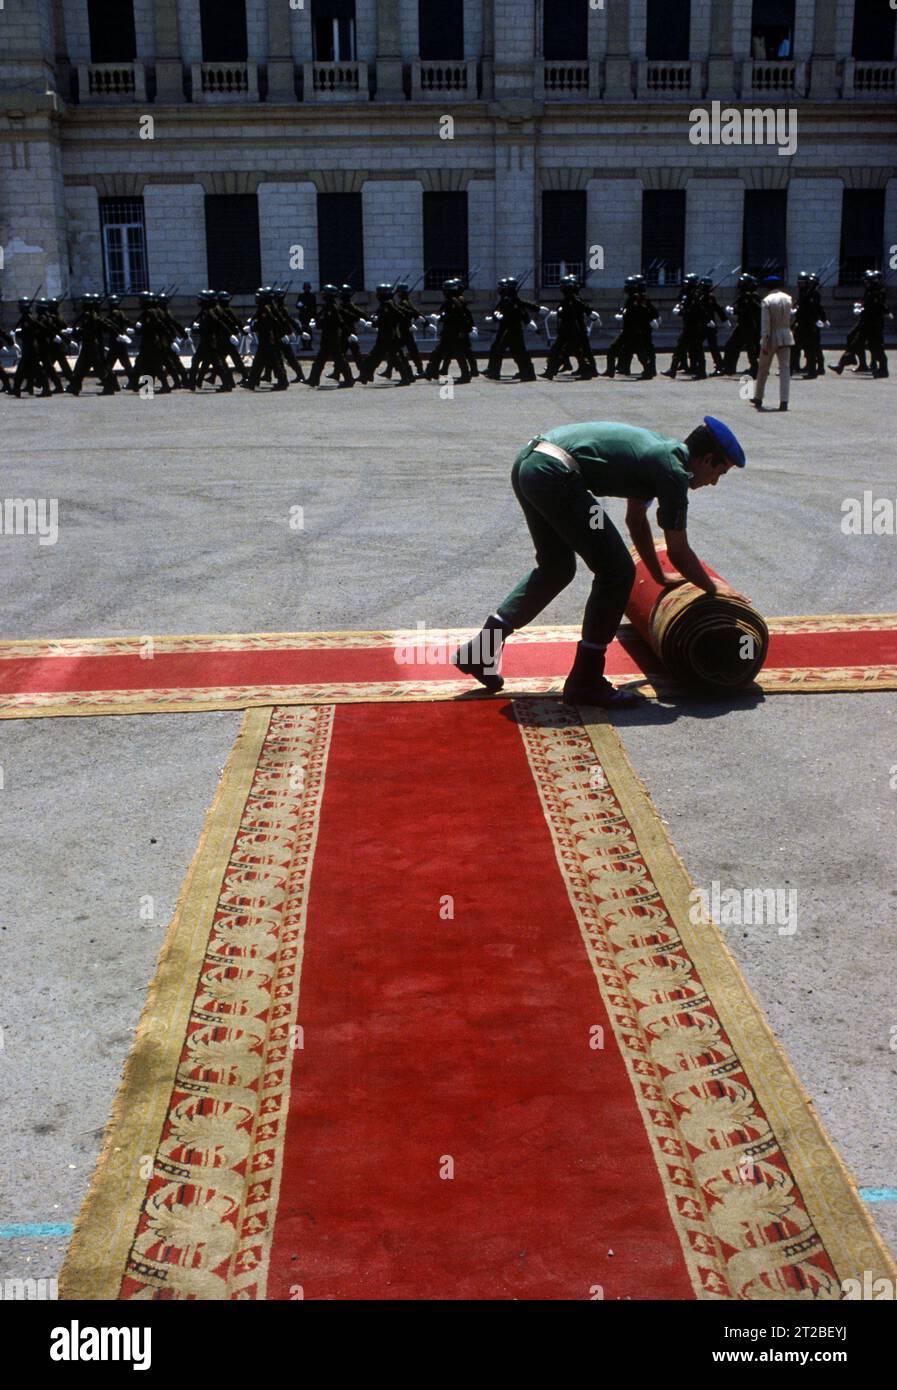 Shah of Iran, his state funeral. Rolling out the red carpet for the military parade. Cairo, Egypt 2nd August 1980 1980s HOMER SYKES Stock Photo